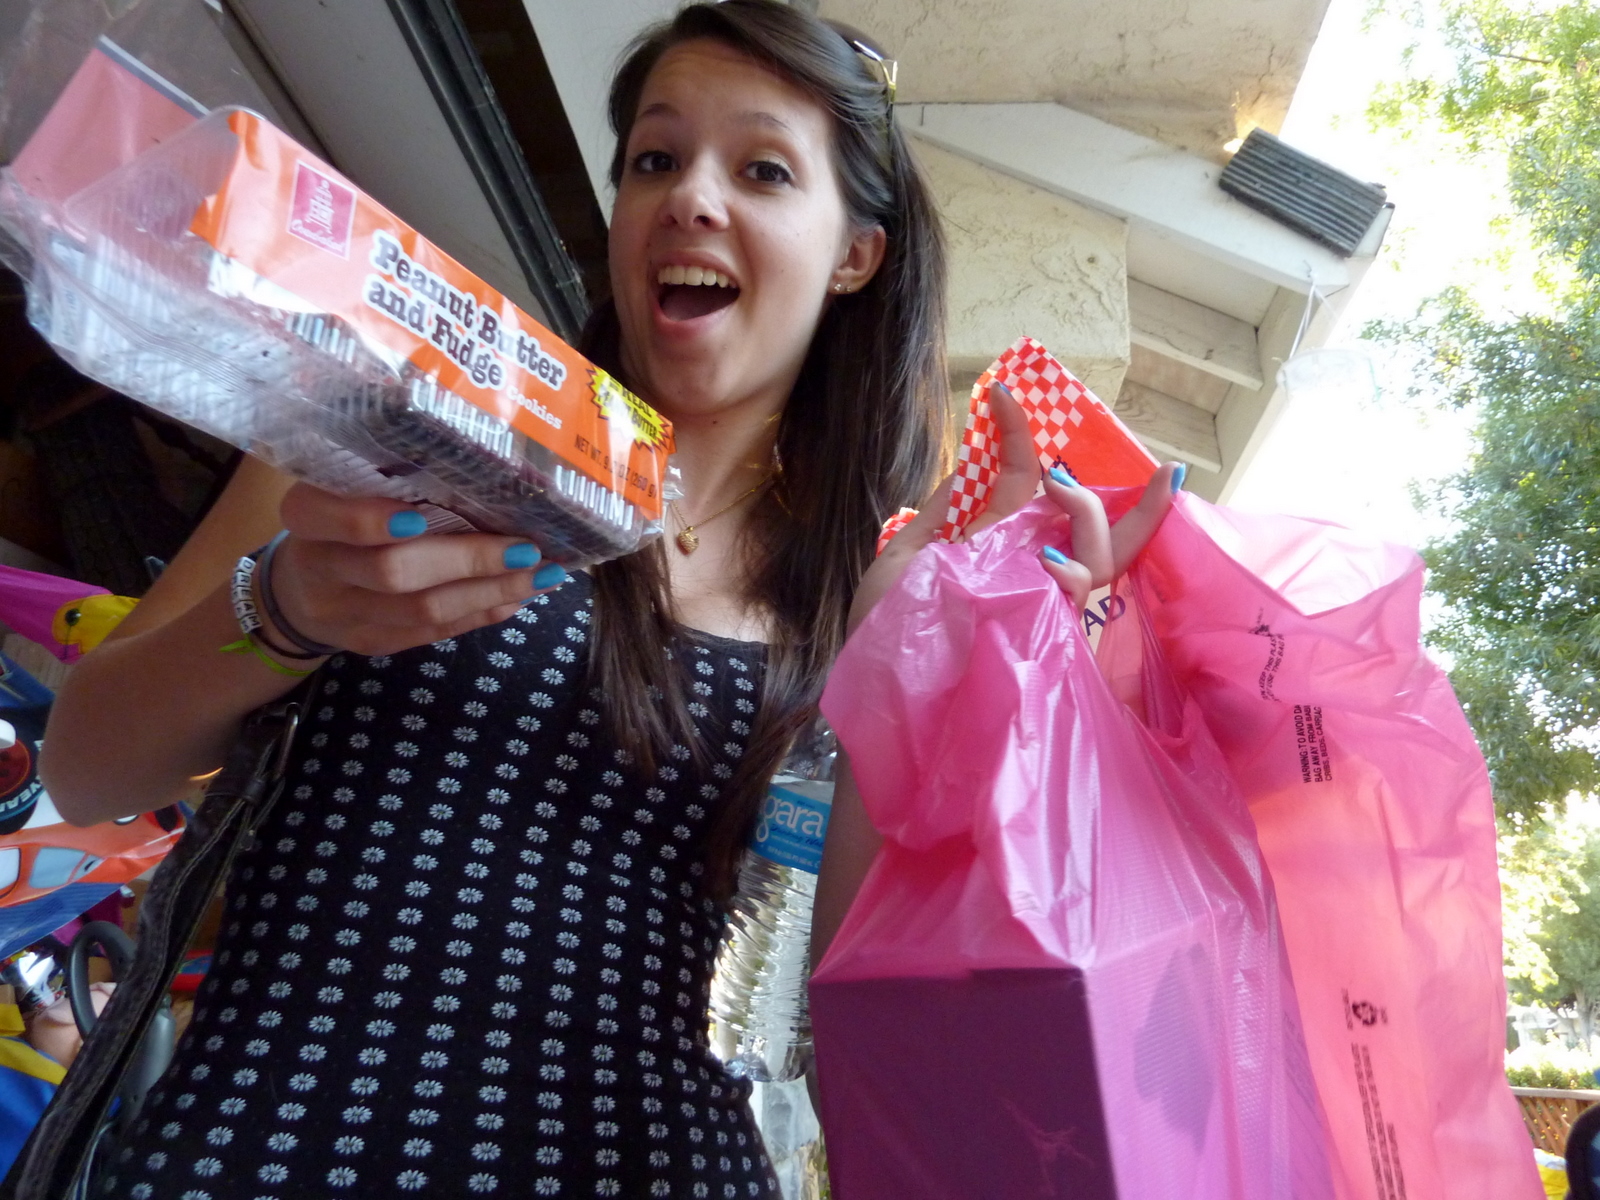 a girl standing holding several packages of soing